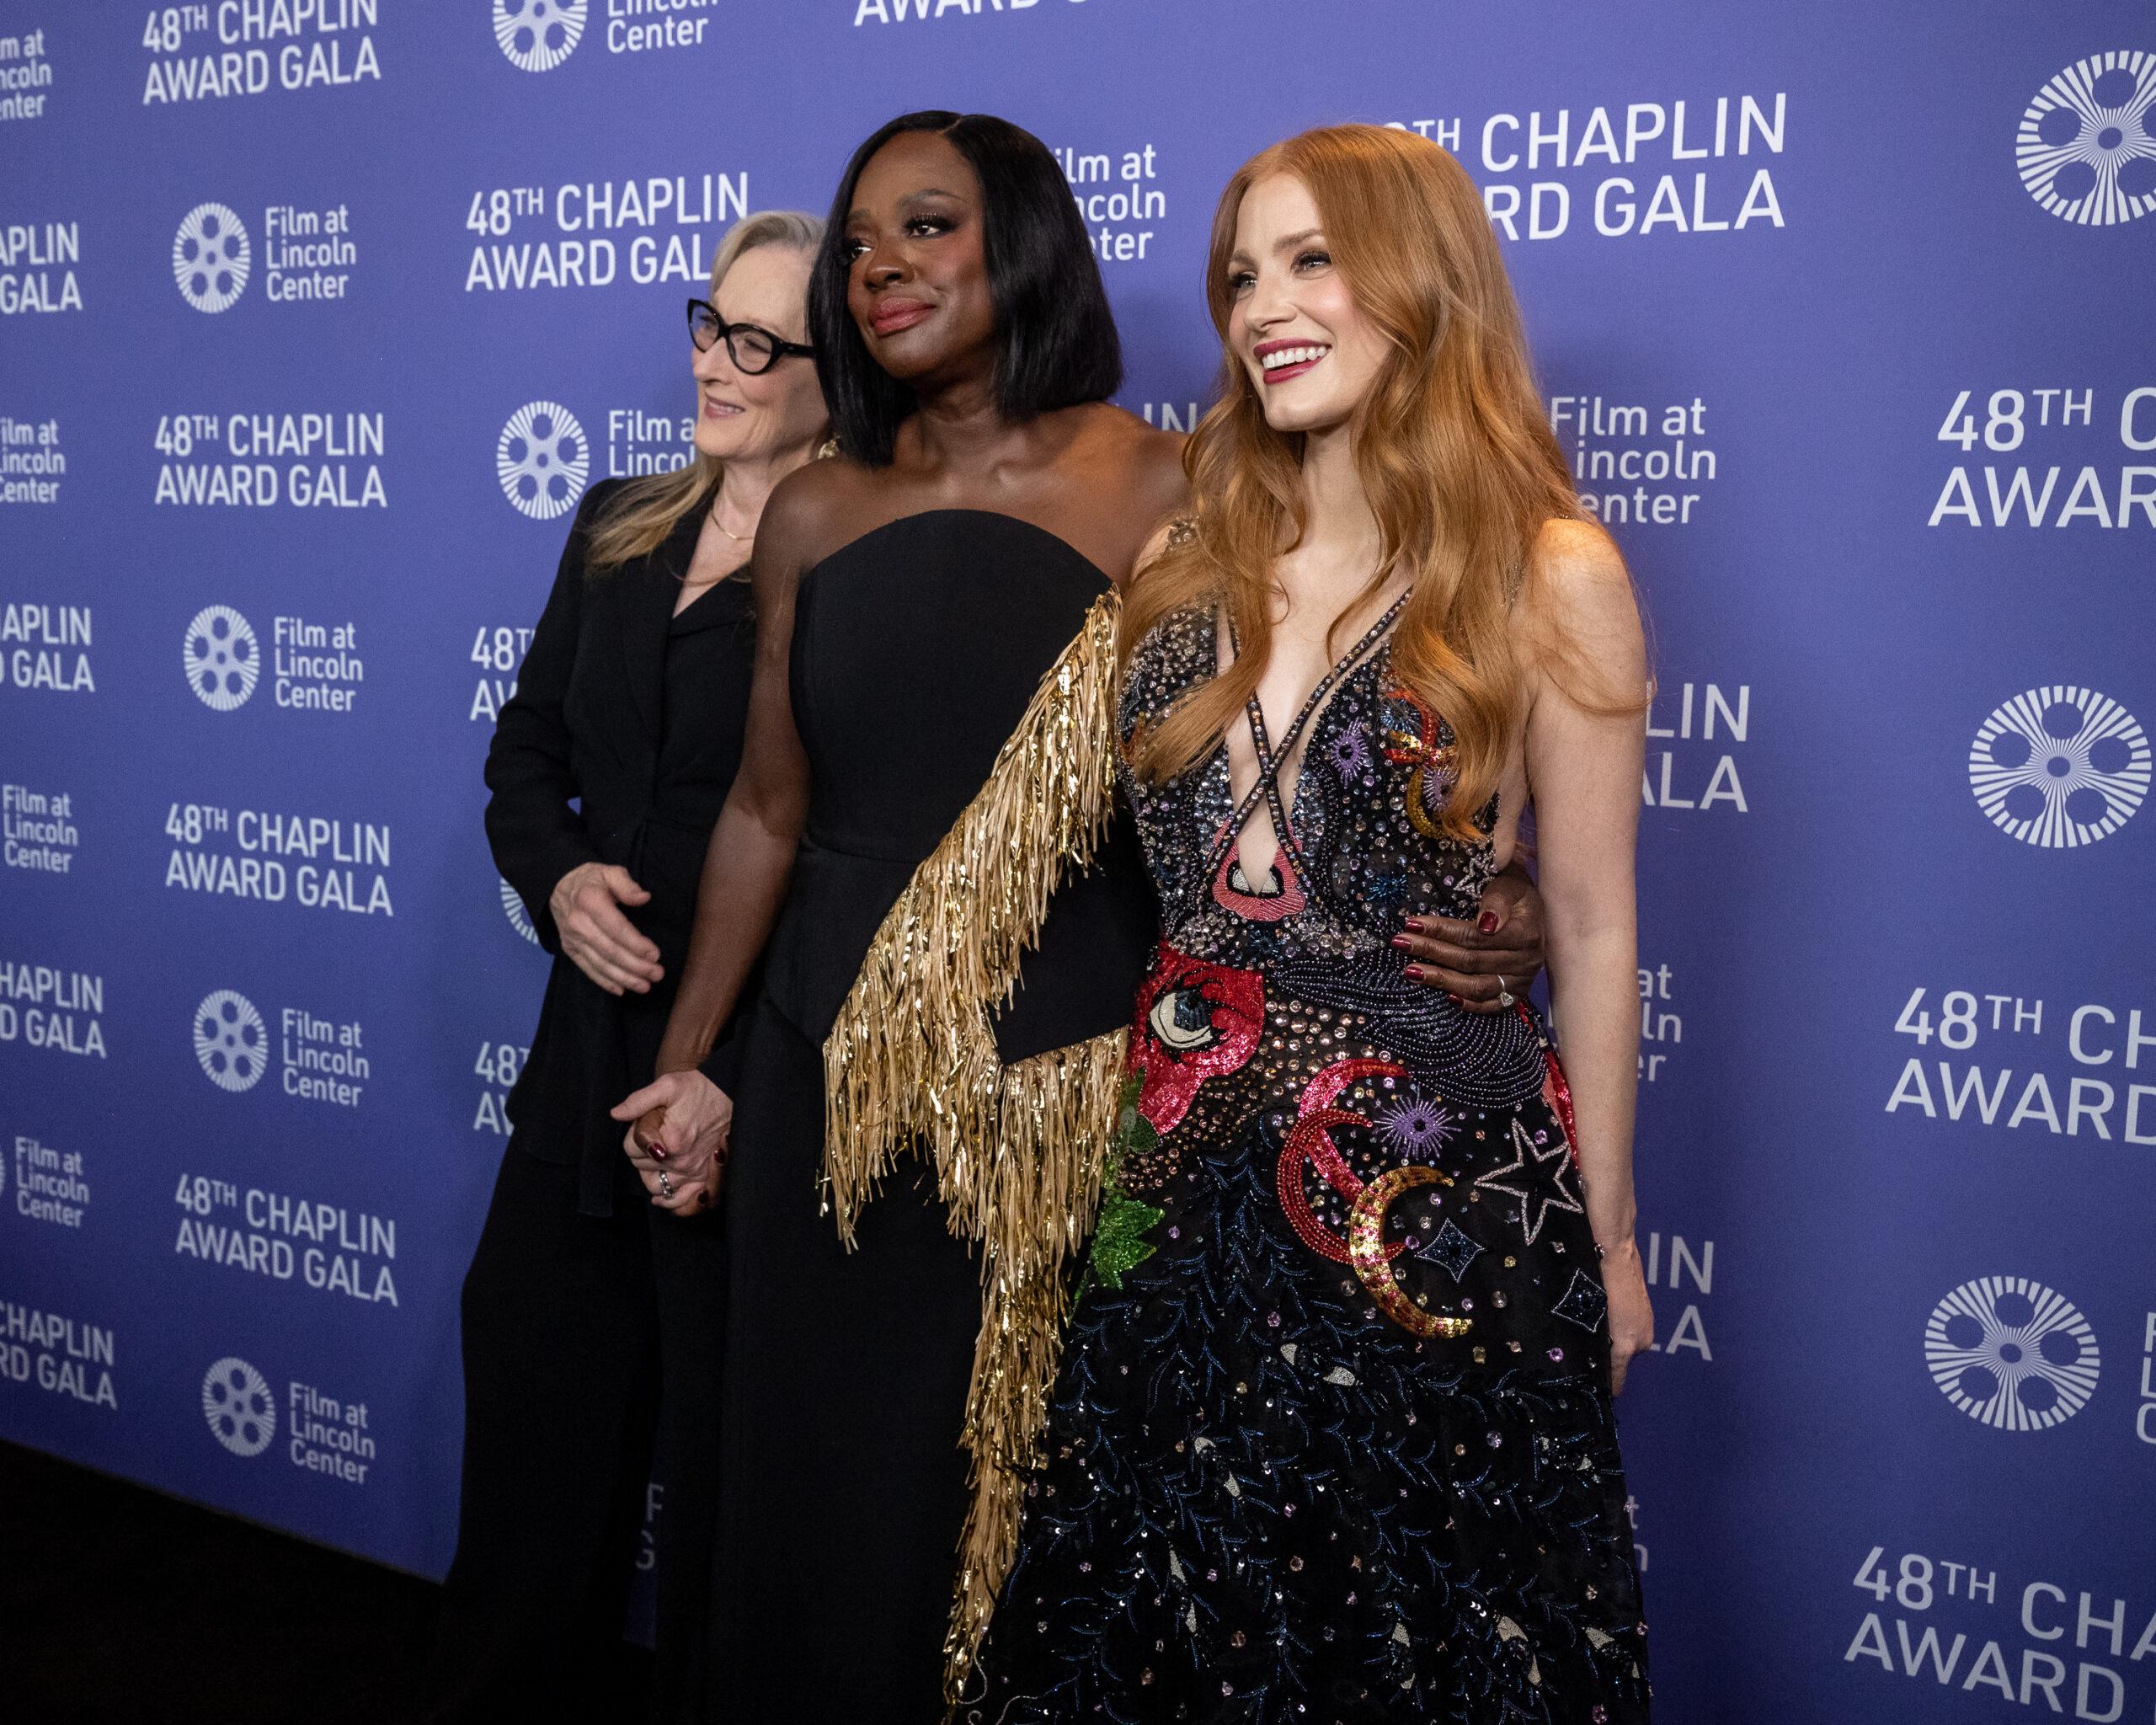 Meryl Streep, Viola Davis, and Jessica Chastain arrive on the red carpet at the 48th Chaplin Award Gala honoring Viola Davis at Alice Tully Hall, Lincoln Center in New York City on Monday, April 24, 2023